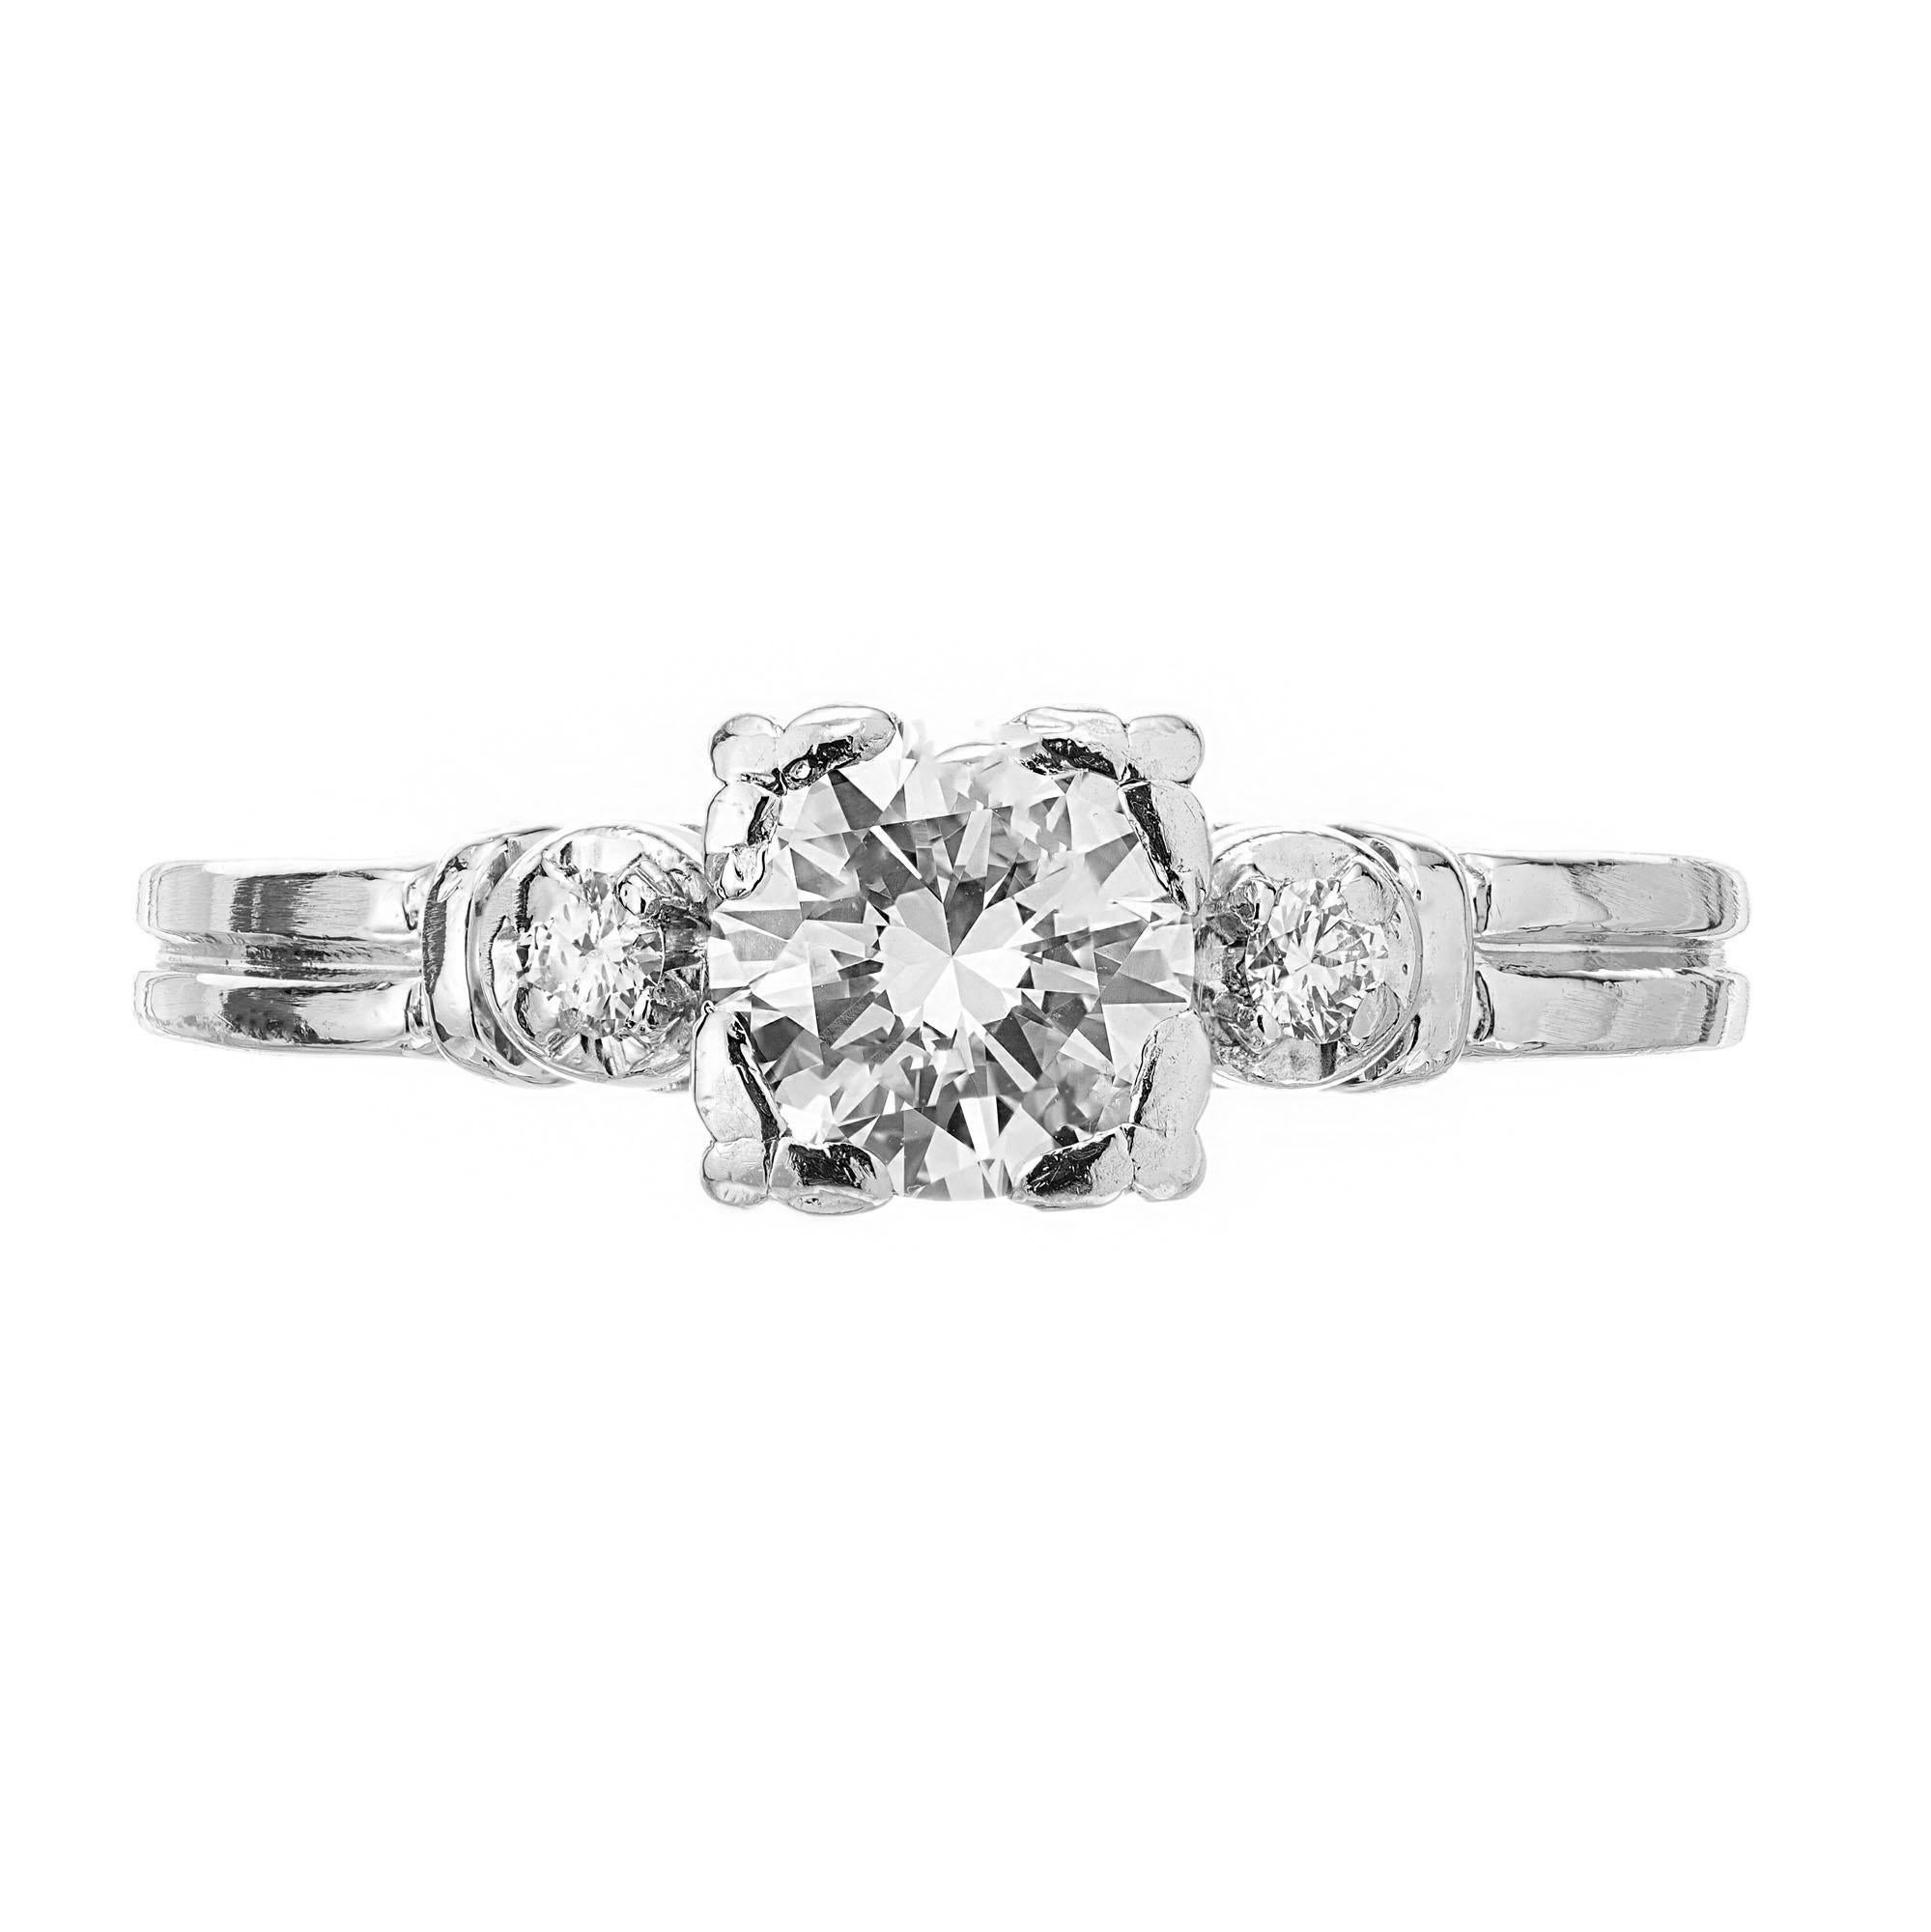 1950's handmade Diamond engagement ring. EGL certified round transitional ideal cut center stone in a platinum setting with 2 round full cut side diamonds.  

1 round transitional Ideal cut diamond, approx. total weight .63cts, E to F, VS1, 5.48 x